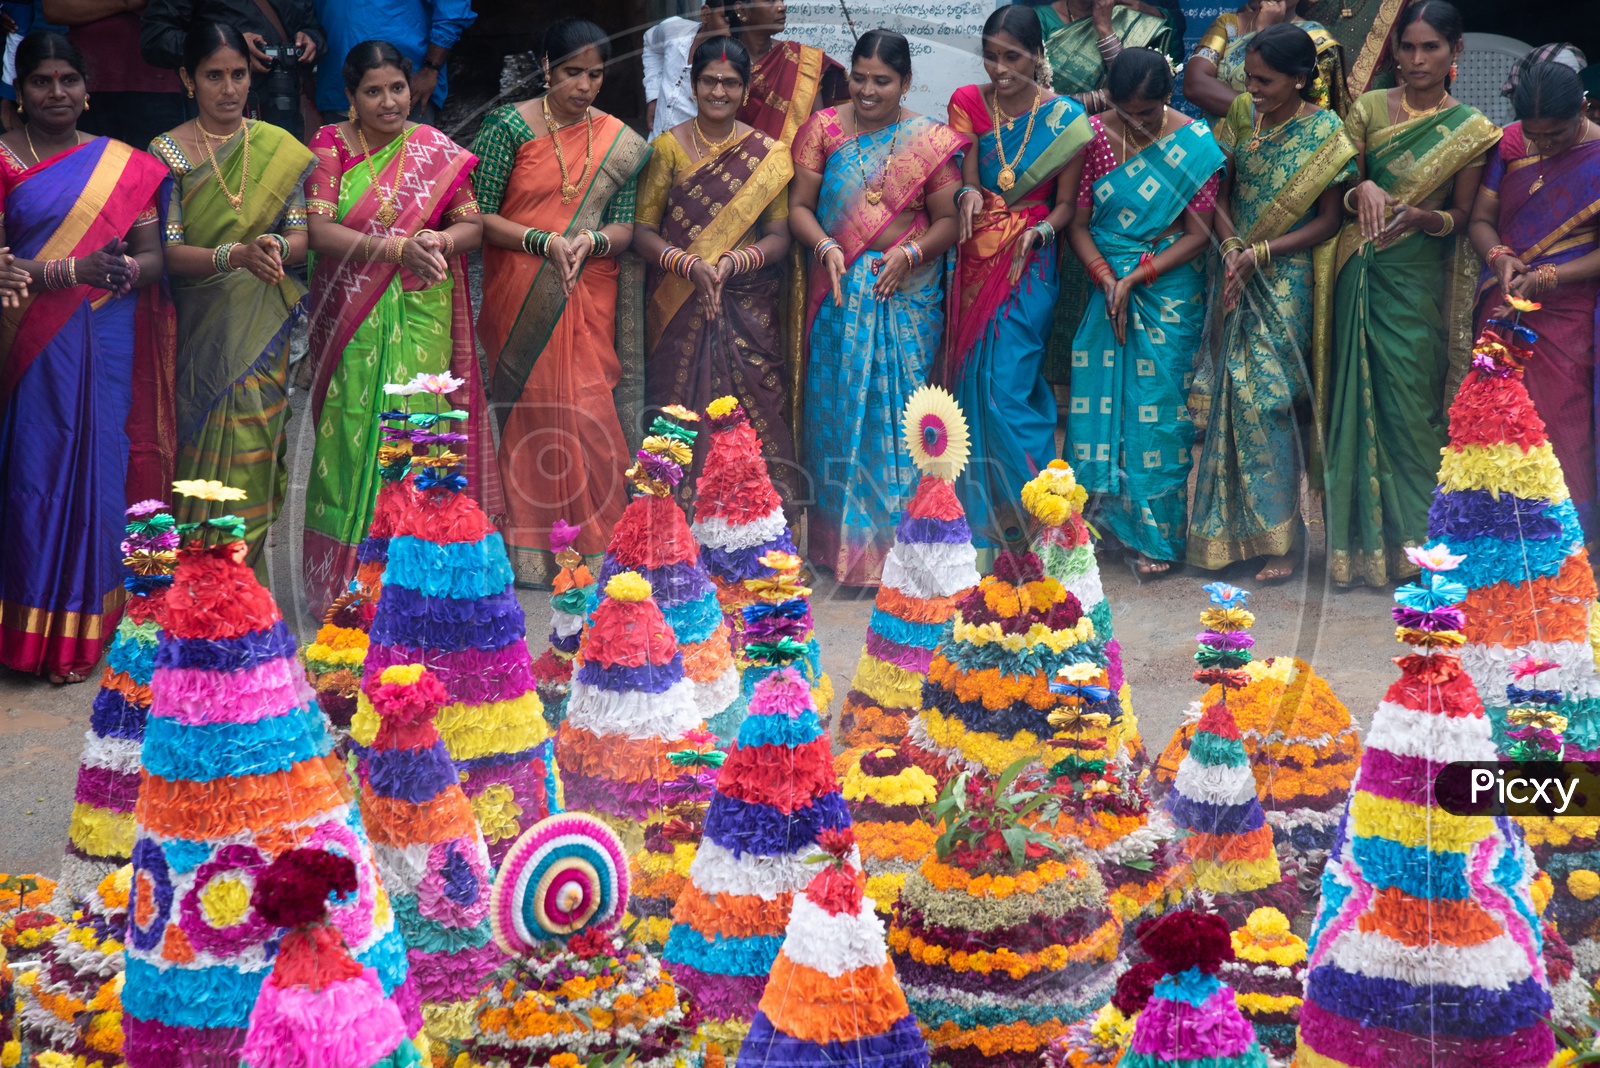 Women of Telangana celebrate Bathukamma, a floral decoration made from medicinal flowers and fragrances arranged like a temple gopuram.